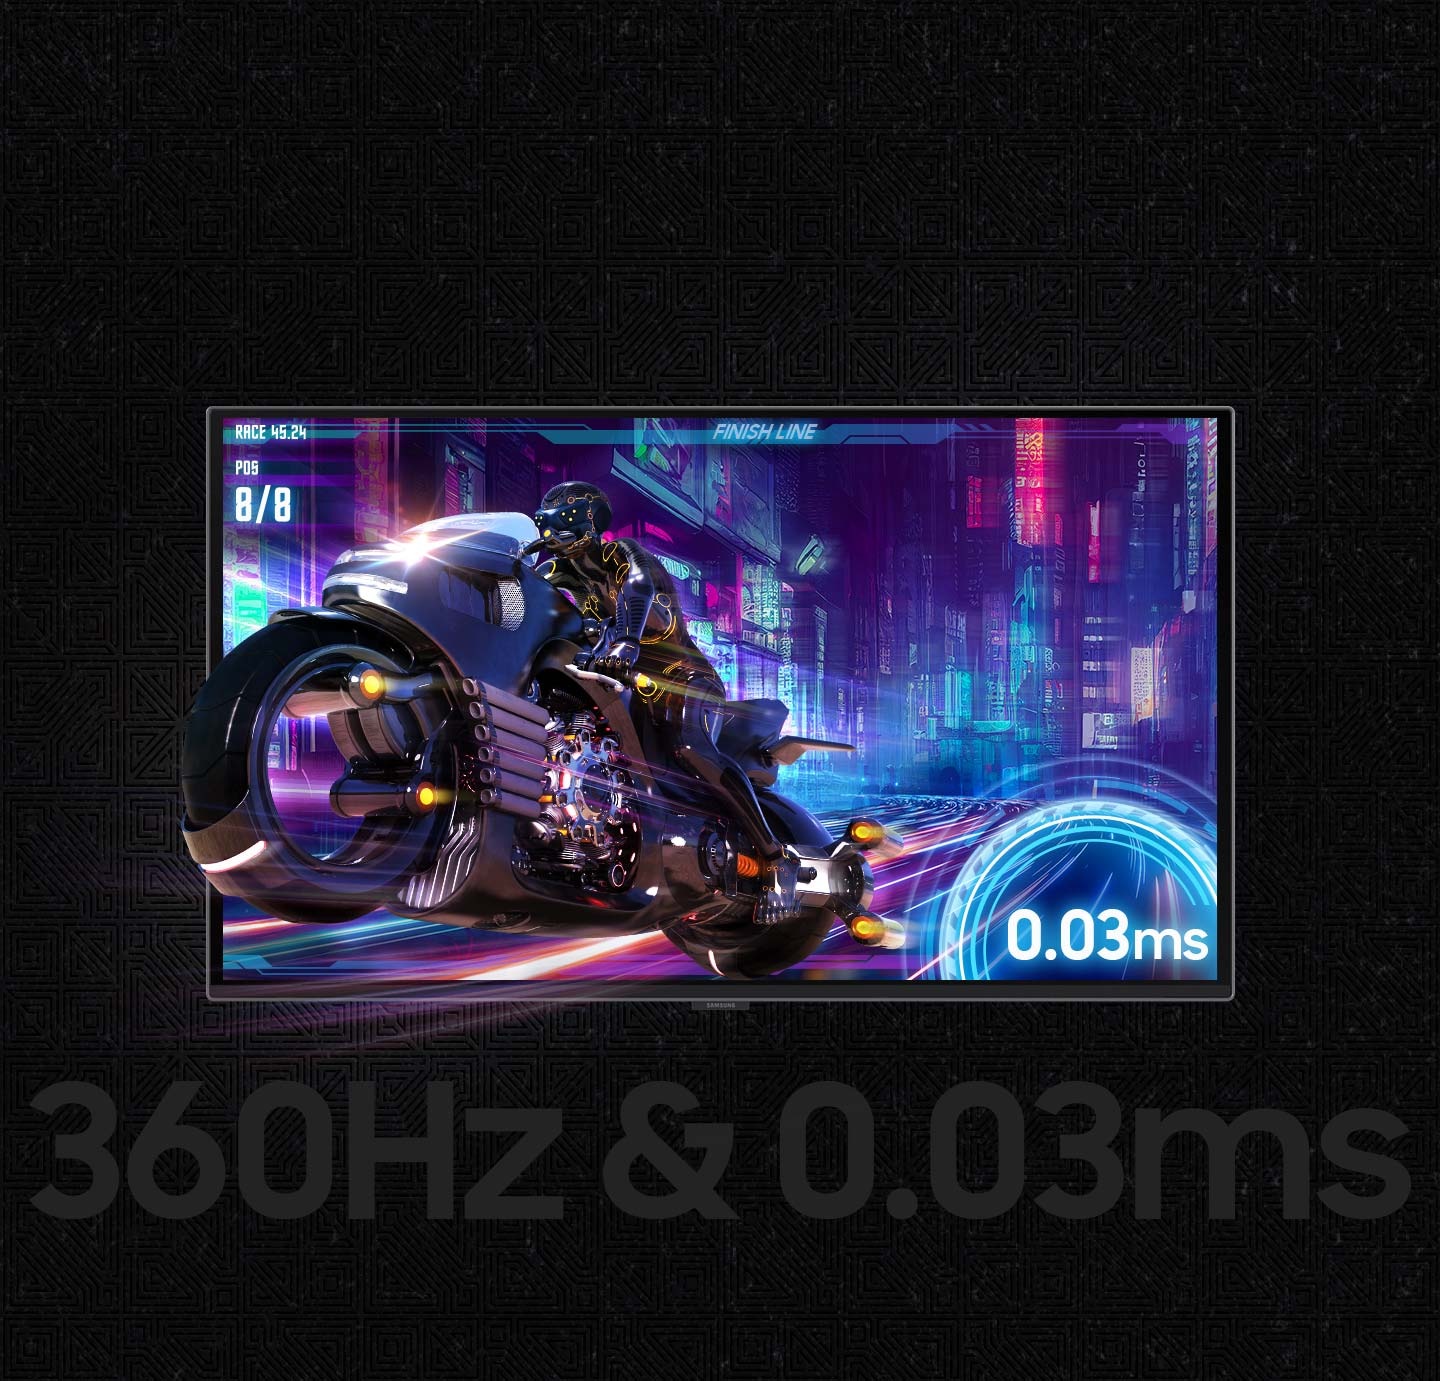 A futuristic motorcycle is coming out of a screen. ON the screen, a refresh rate of .03ms is labeled. Below the screen, it reads "360Hz & 0.03ms".